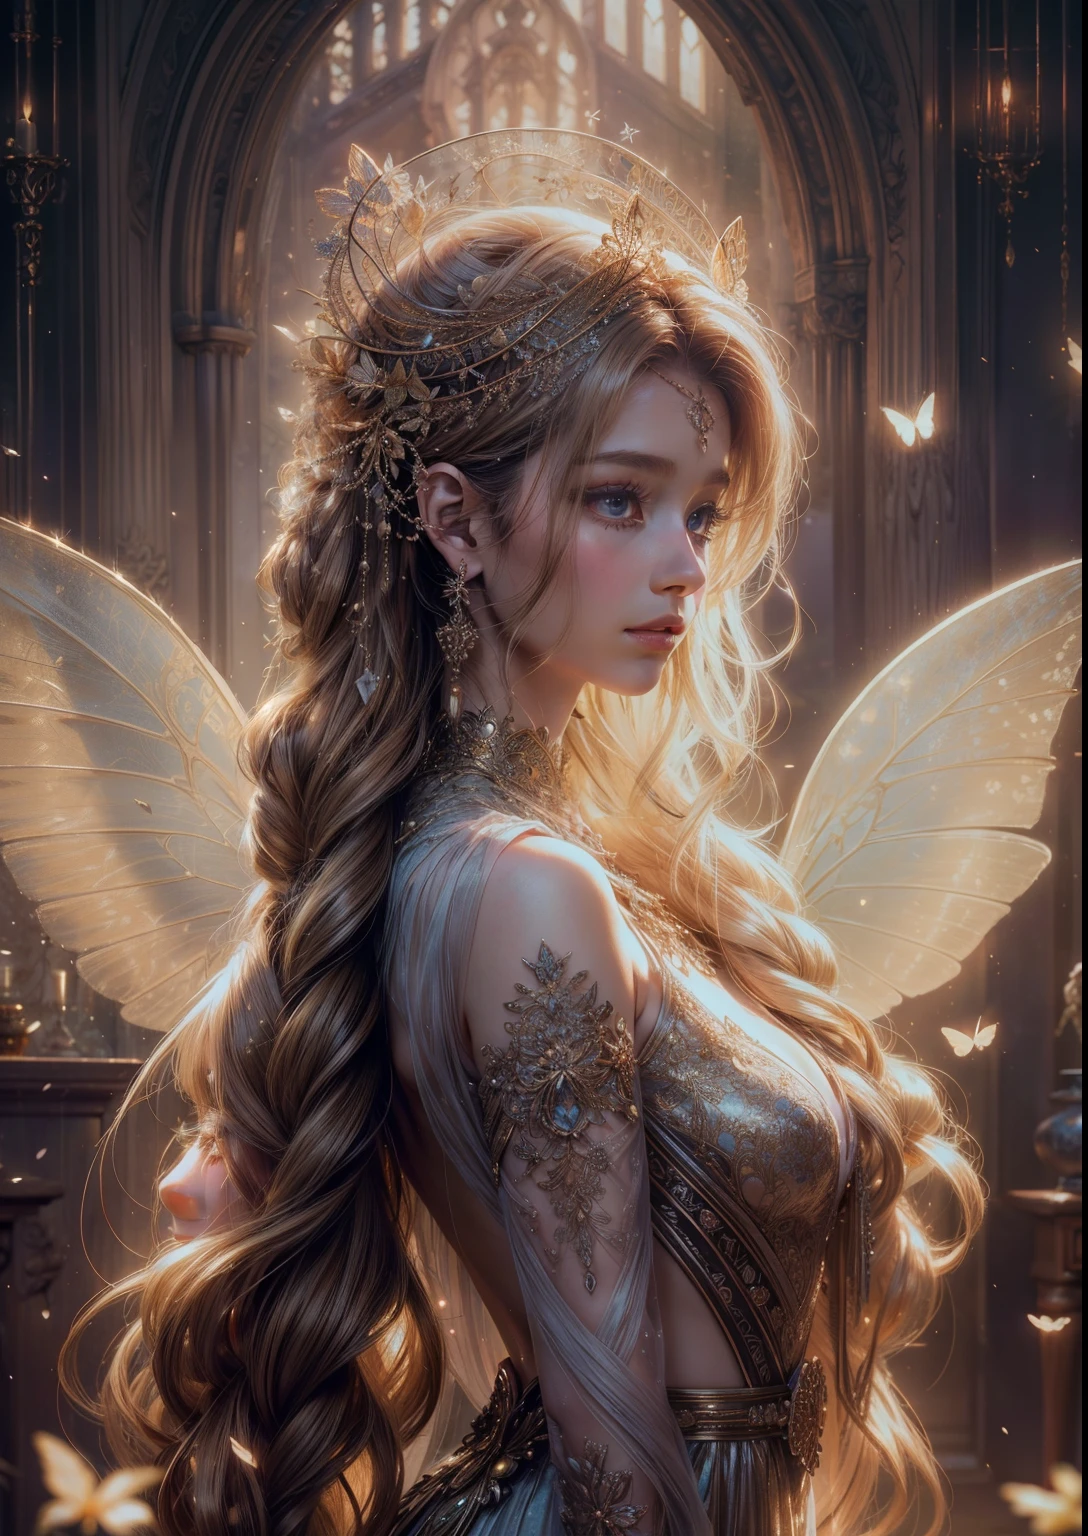 flower spirit,small,butterfly wing,girl,(best quality,4k,8k,highres,masterpiece:1.2),ultra-detailed,(realistic,photorealistic,photo-realistic:1.37),ethereal,soft colors,glowing light,enchanted forest,magical atmosphere,nature background,delicate petals,vibrant flowers,gentle breeze,peaceful expression,vivid eyes,long flowing hair,graceful pose,sunlit scene,subtle details,fantastical elements,whimsical,translucent wings,serene ambiance,sprightly,joyful,golden hour illumination,fairy-like,harmonious composition,delightful intricacies,intricate patterns,dreamy,sublime,pure,innocent,playful,enchanted moment